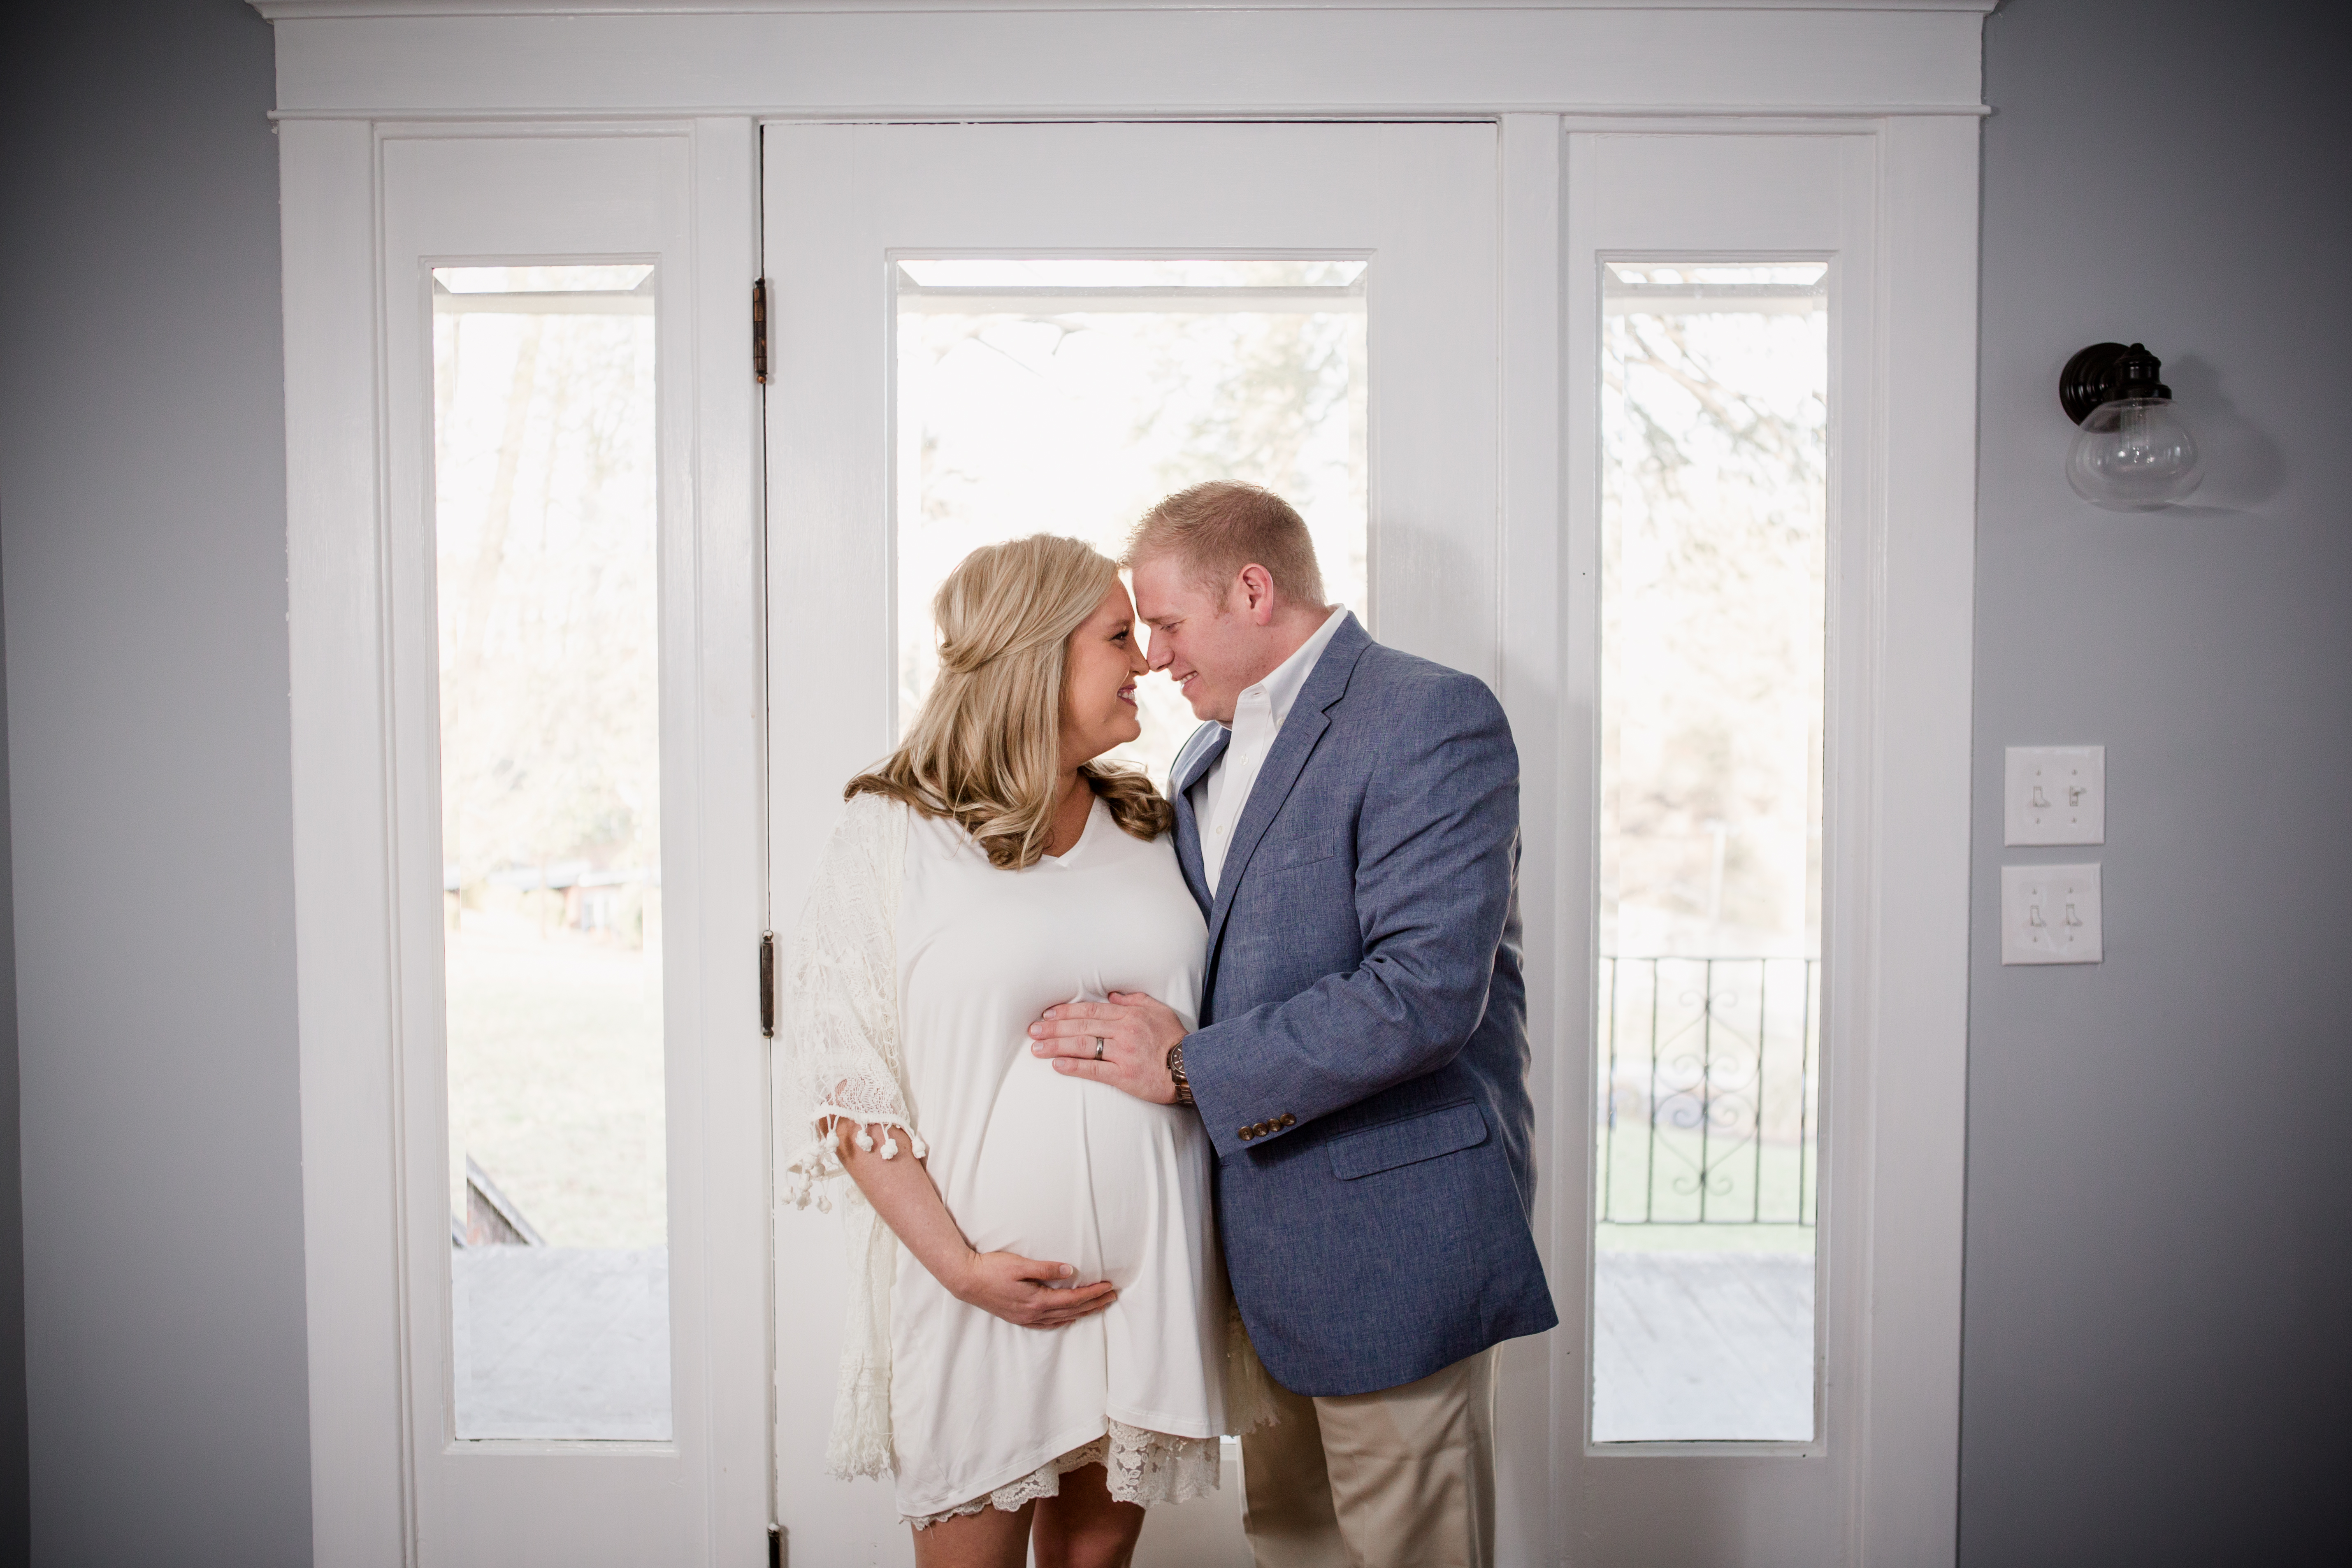 Hands on her belly by Knoxville Wedding Photographer, Amanda May Photos.